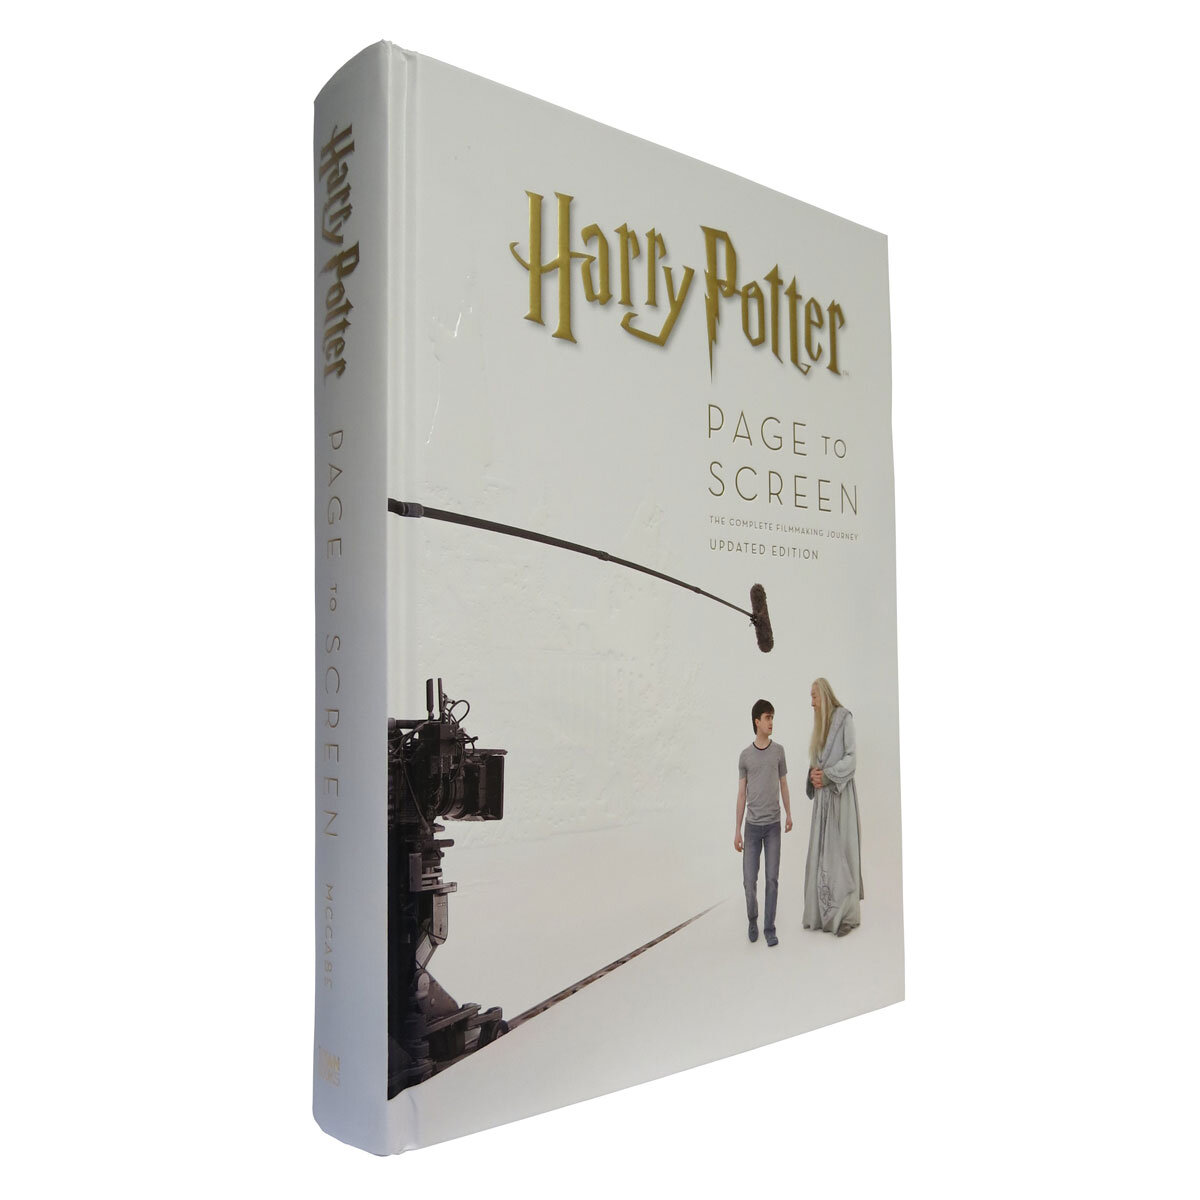 Harry Potter Page to Screen: The Complete Filmmaking Jour...